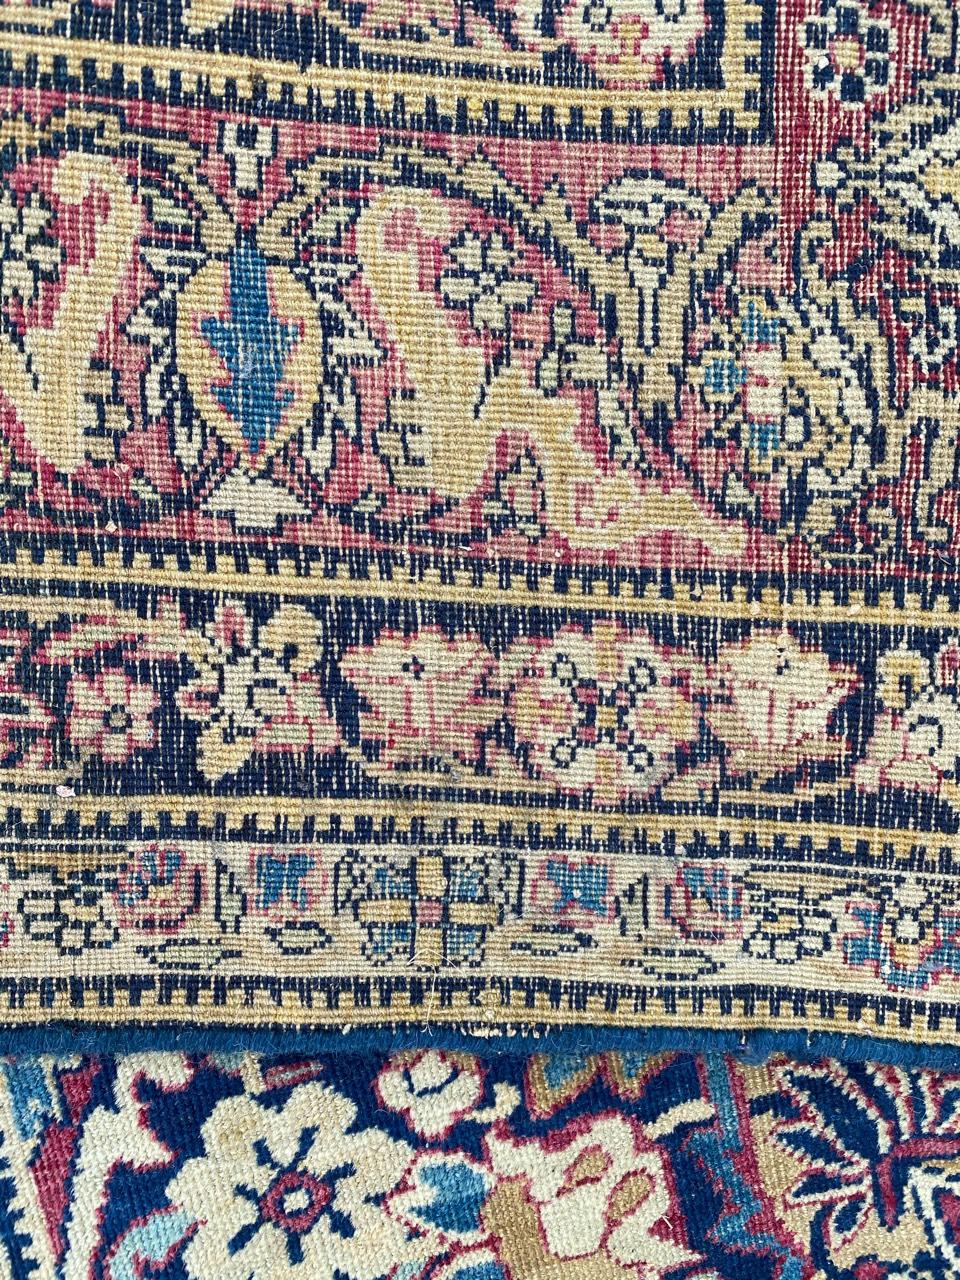 Very beautiful late 19th century rug with a nice floral and central medallion design and beautiful natural colors with dark blue, yellow, blue and red, entirely and finely hand knotted with wool velvet on cotton foundation.